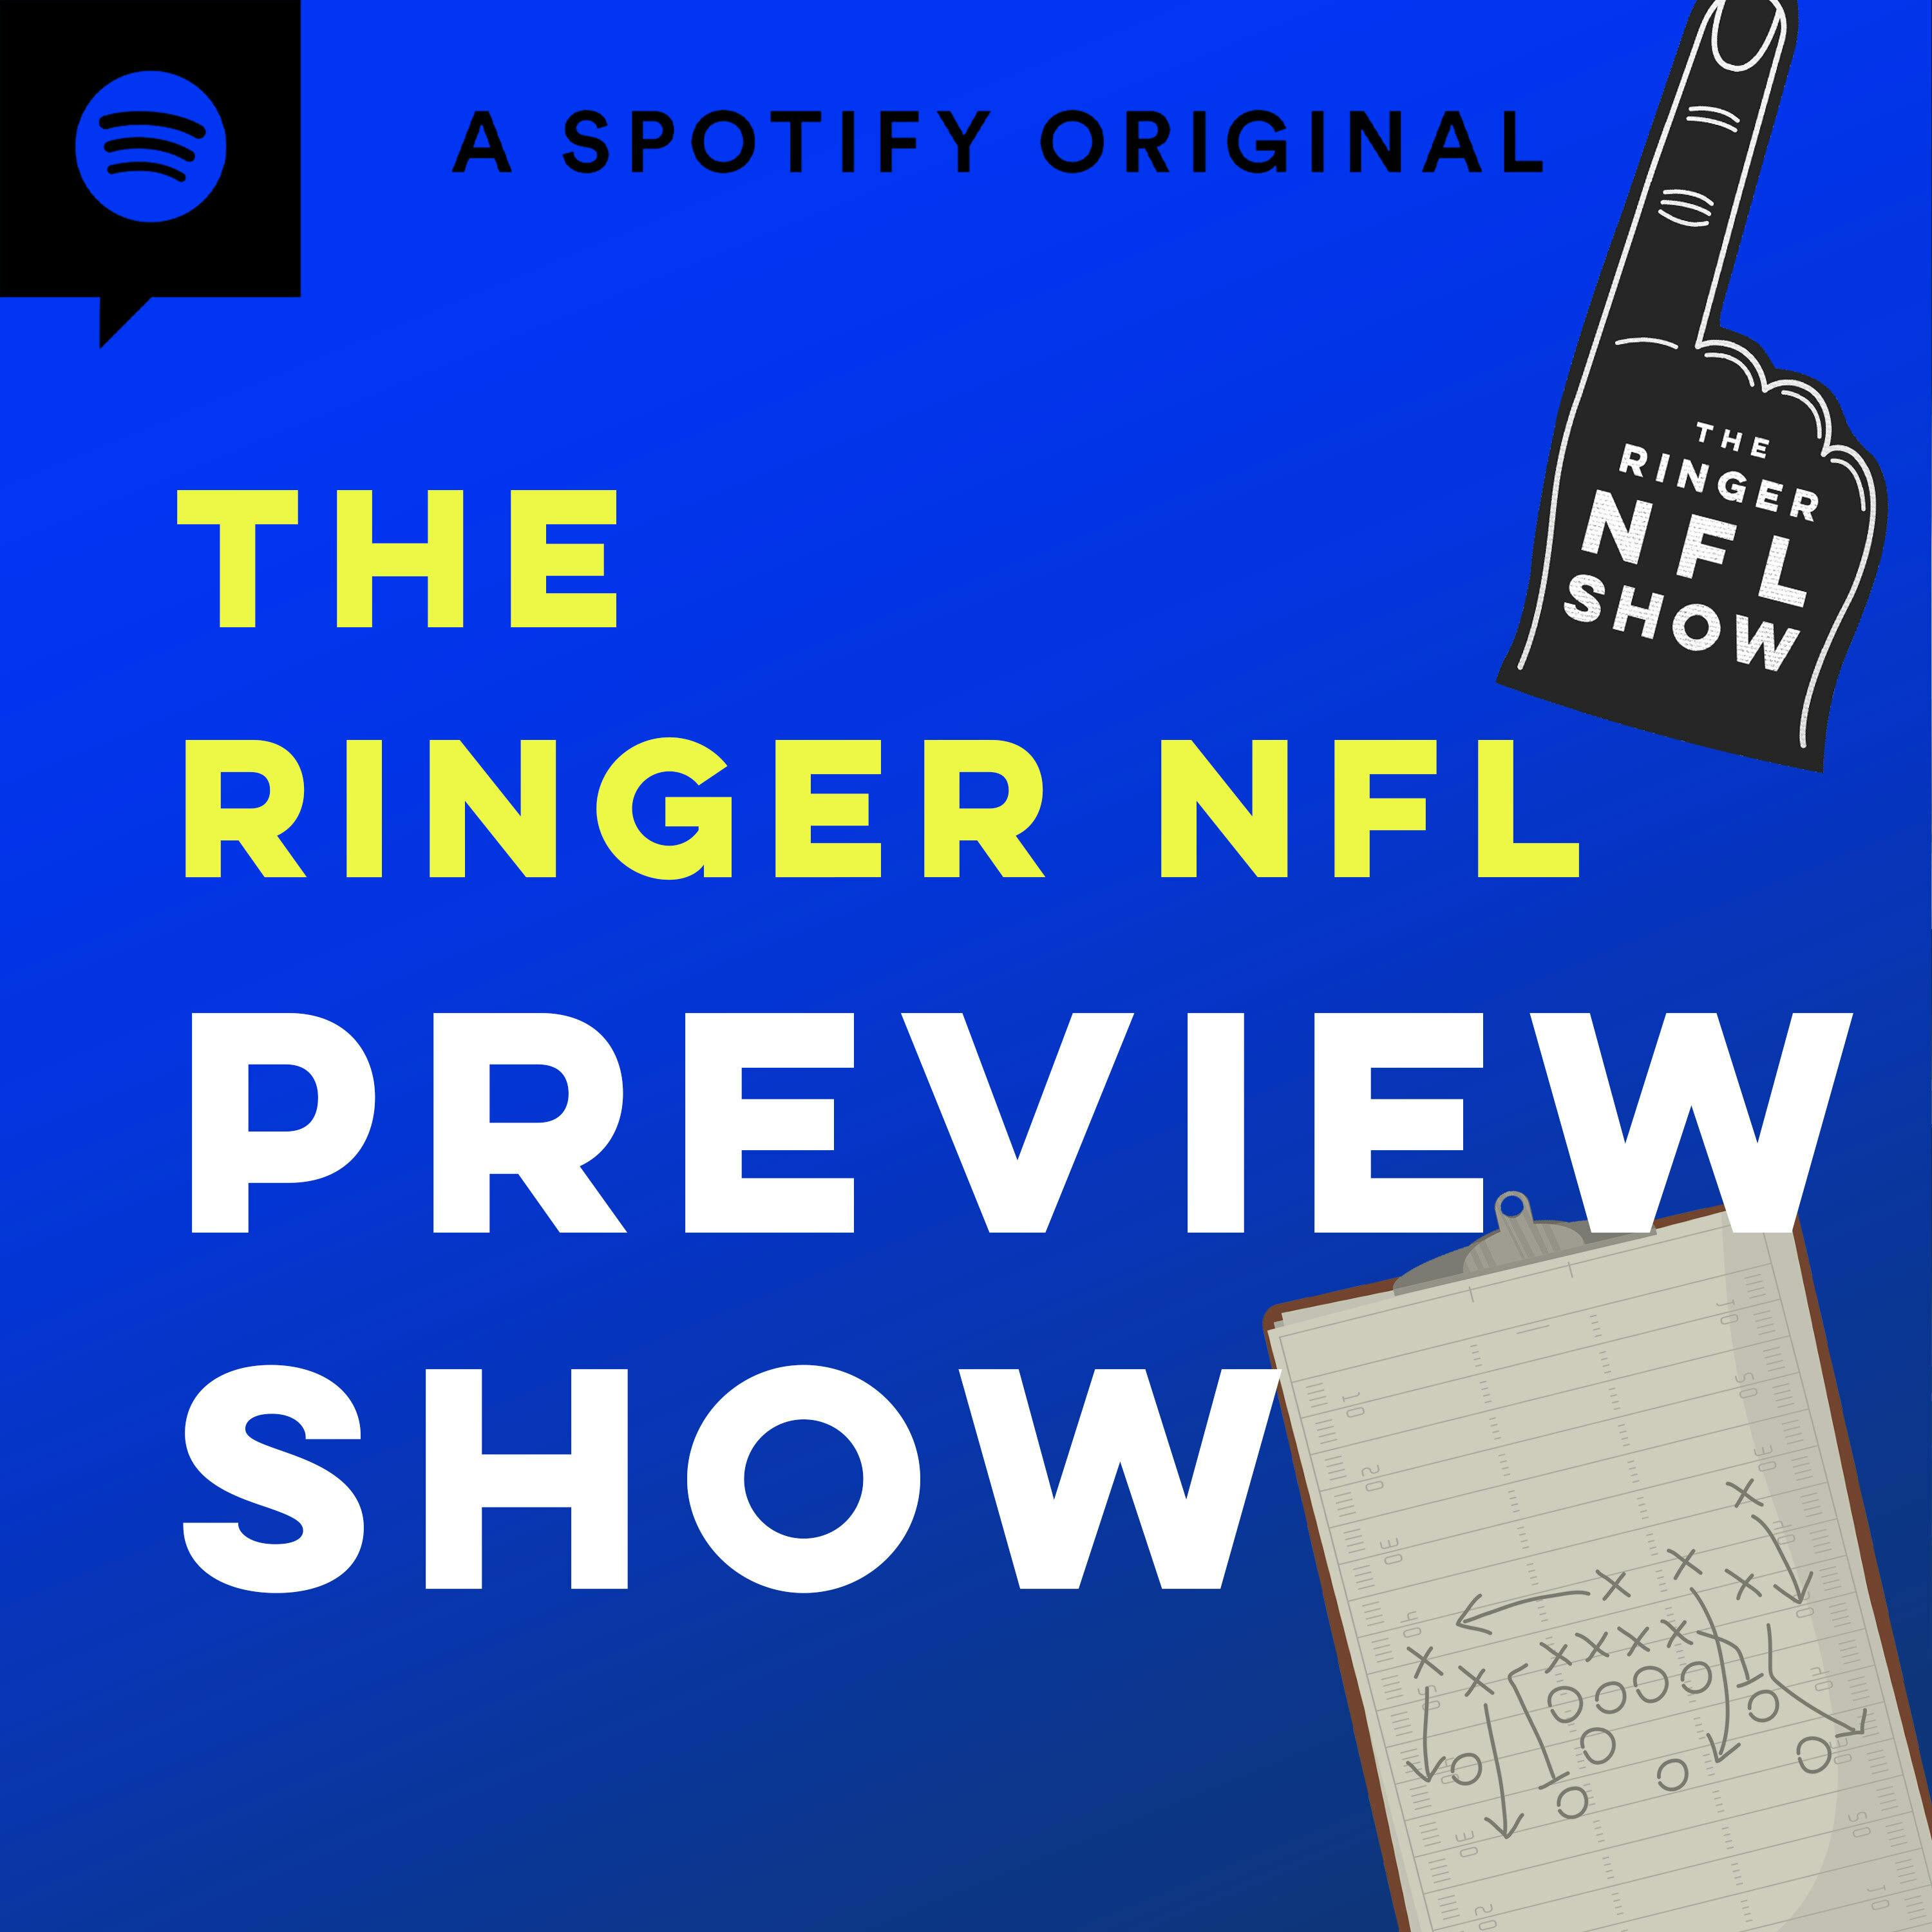 Week 18 Preview: Damar Hamlin Update, Plus Lions-Packers and Jaguars-Titans | The Ringer NFL Preview Show